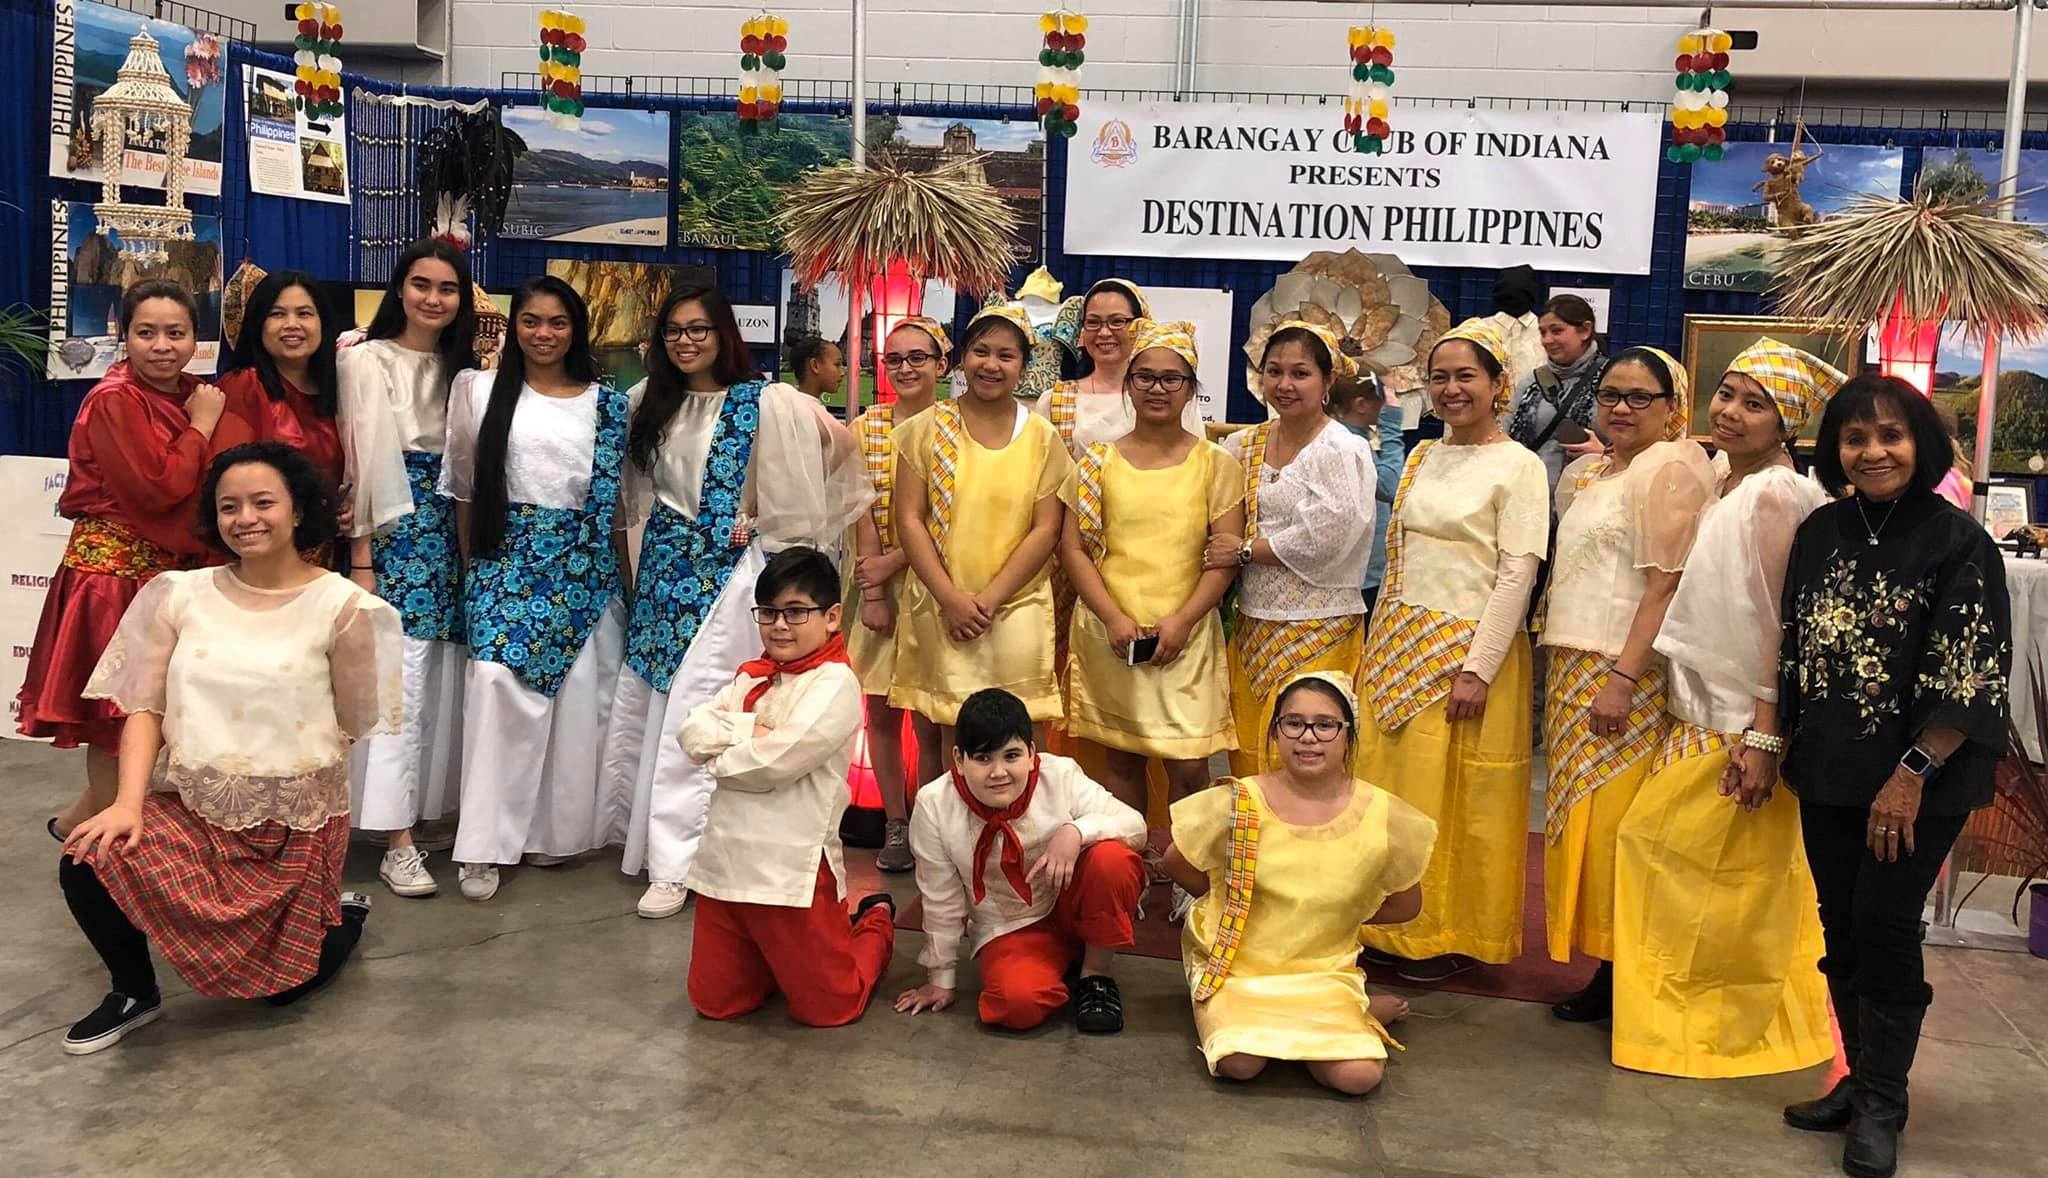 a group of people in various costumes pose in a room whose walls are filled with posters showing tropical destinations. Behind them, a banner reads "Barangay Club of Indiana Presents Destination Philippines".